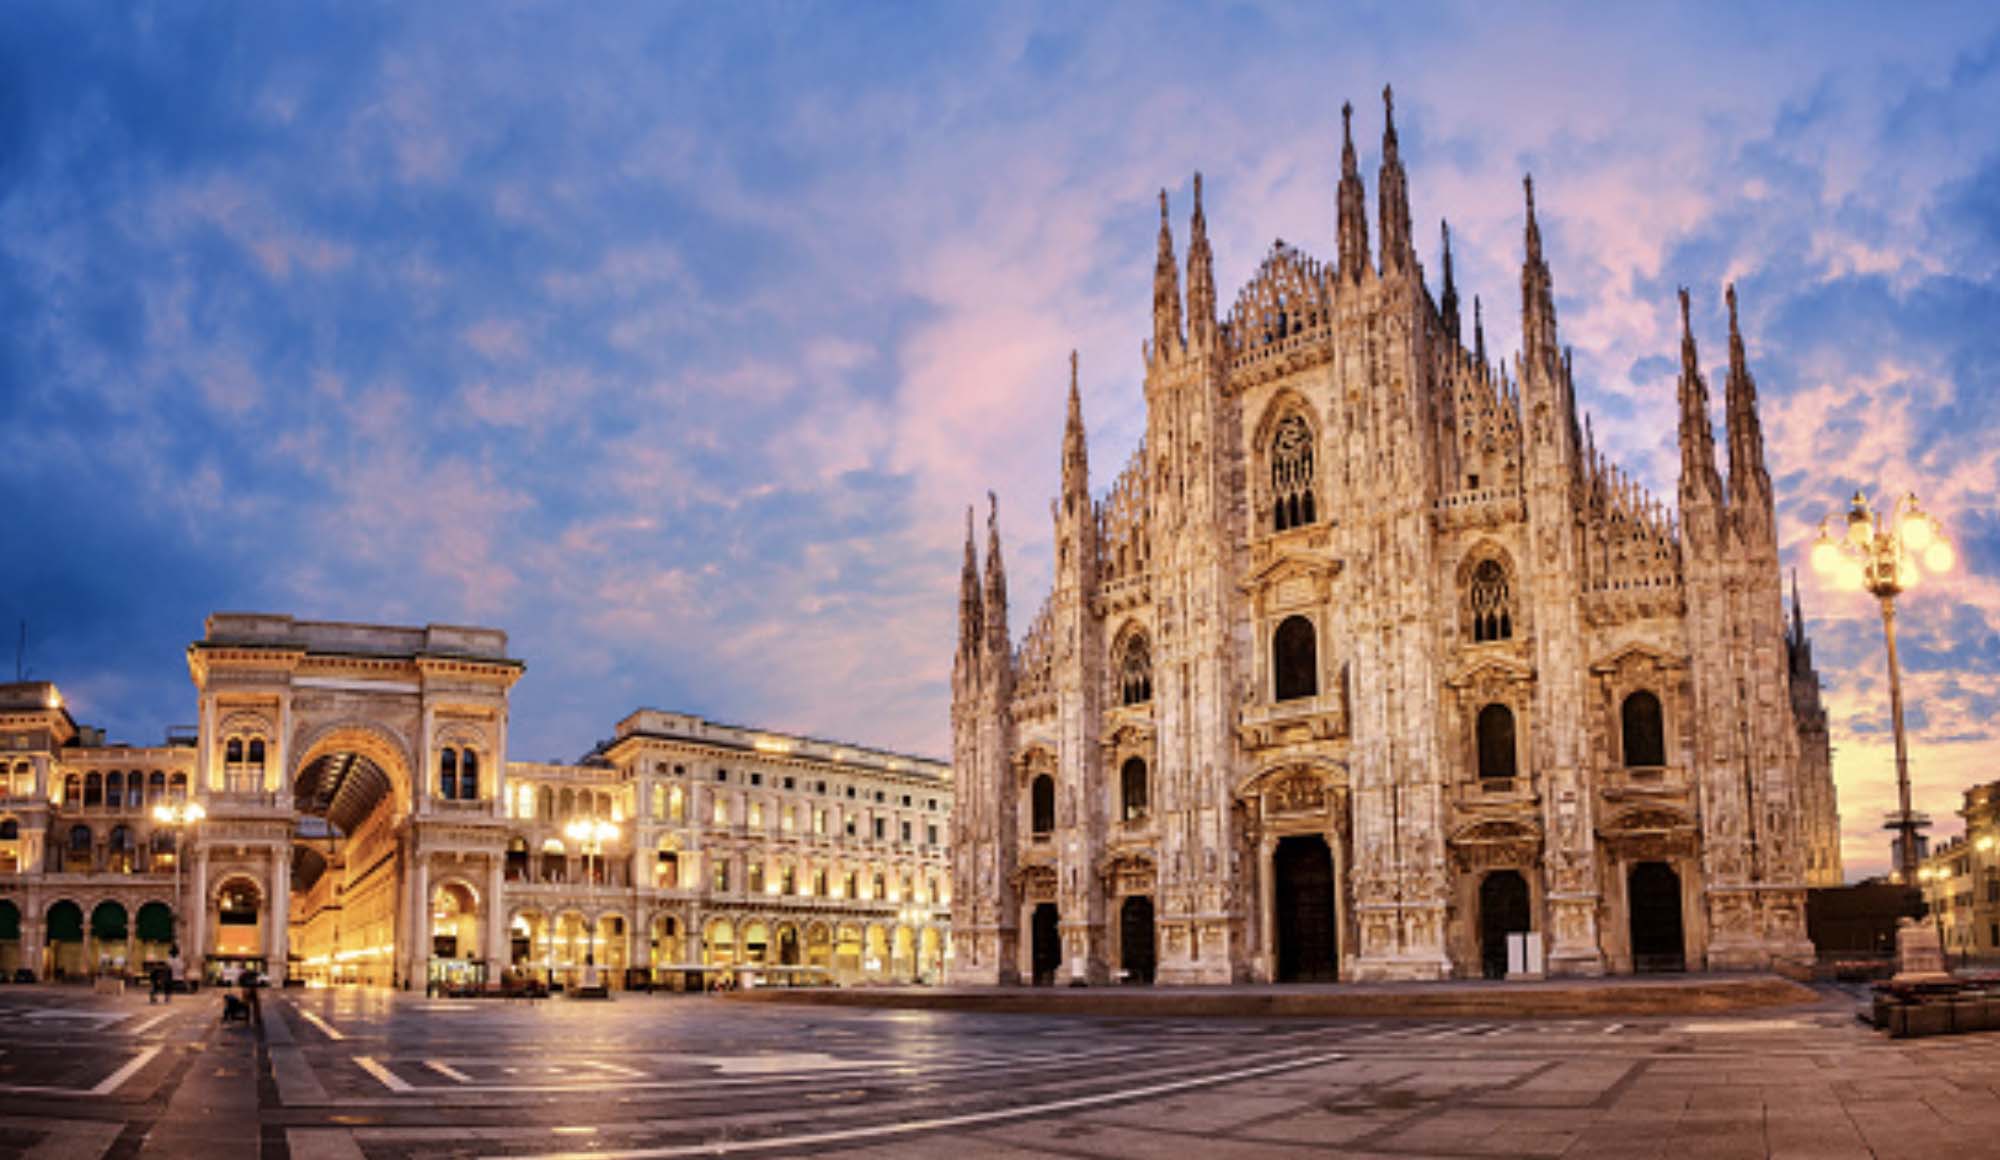 Confirmed cases in Italy exceeds 700000. Milan's Covid-19 hospital adds 1 case in 3 minutes!